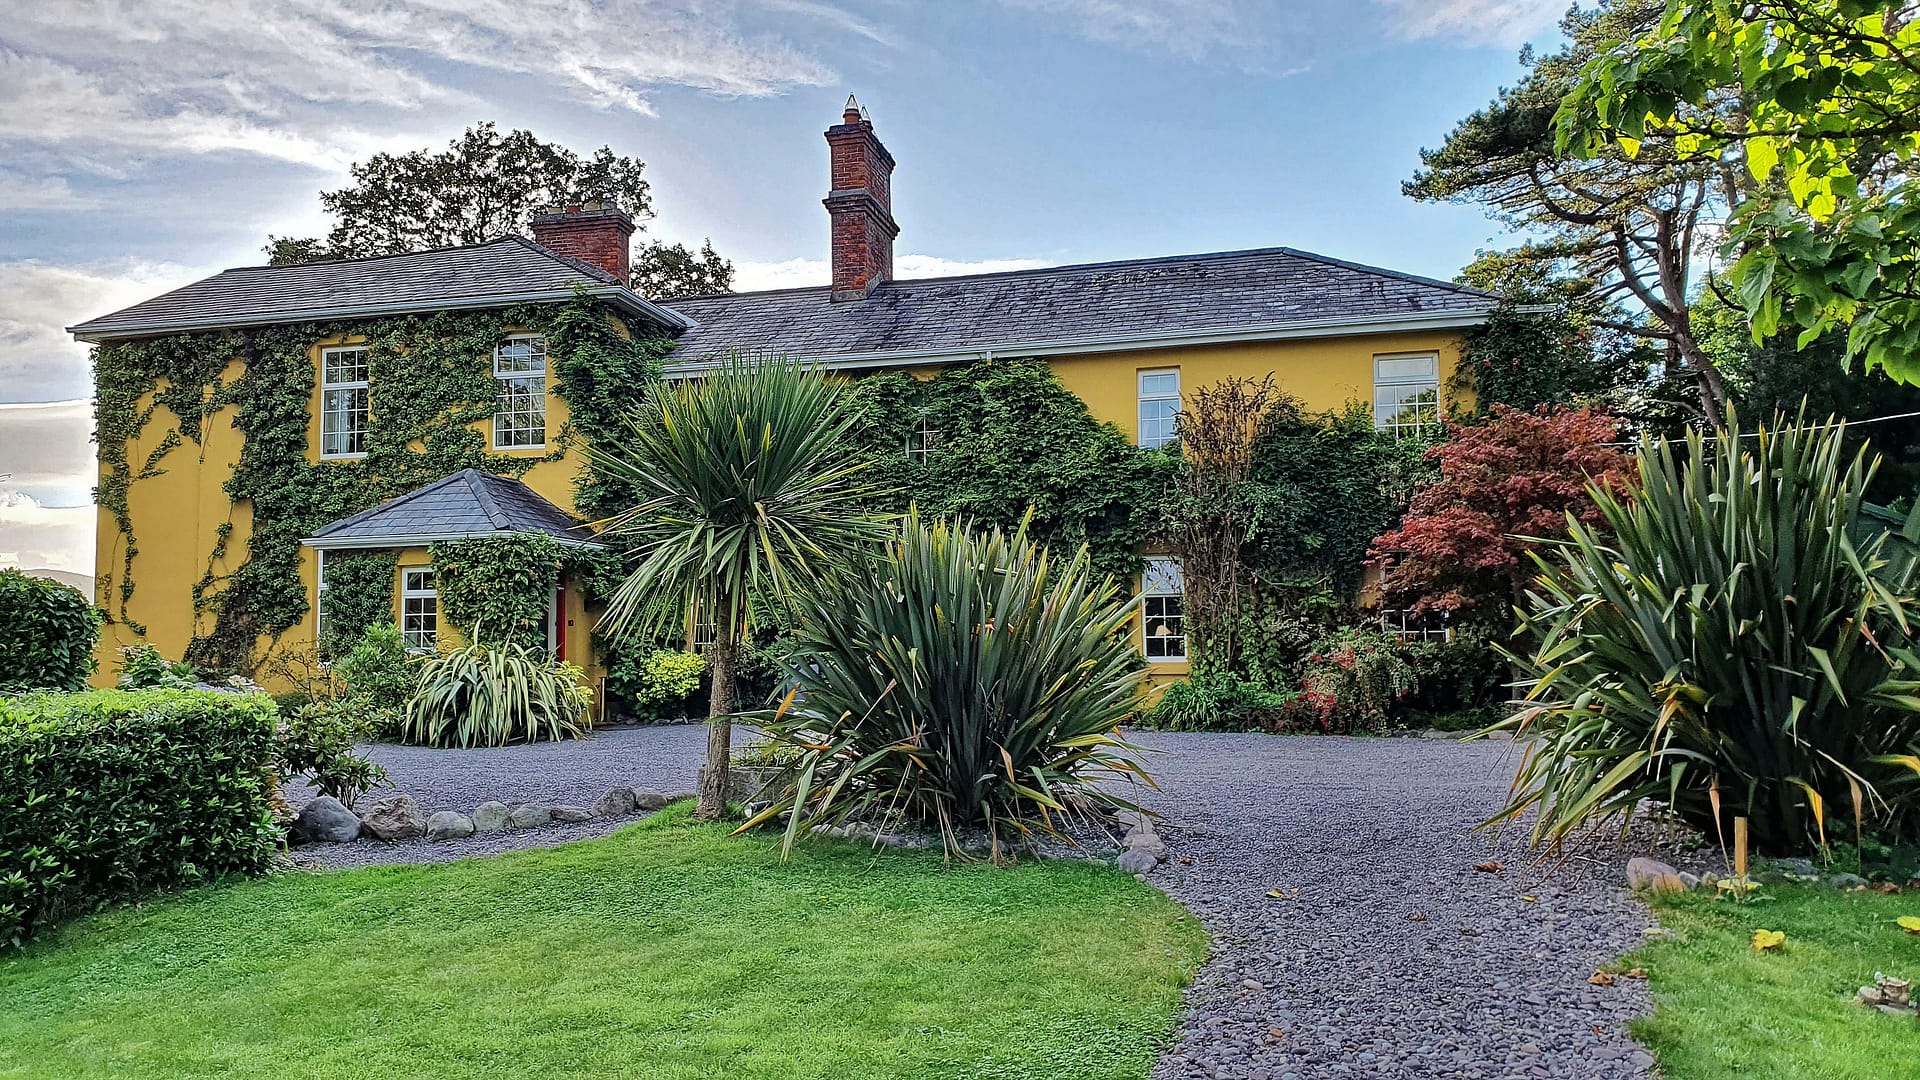 Carrig Country House on the Iveragh Peninsula in County Kerry